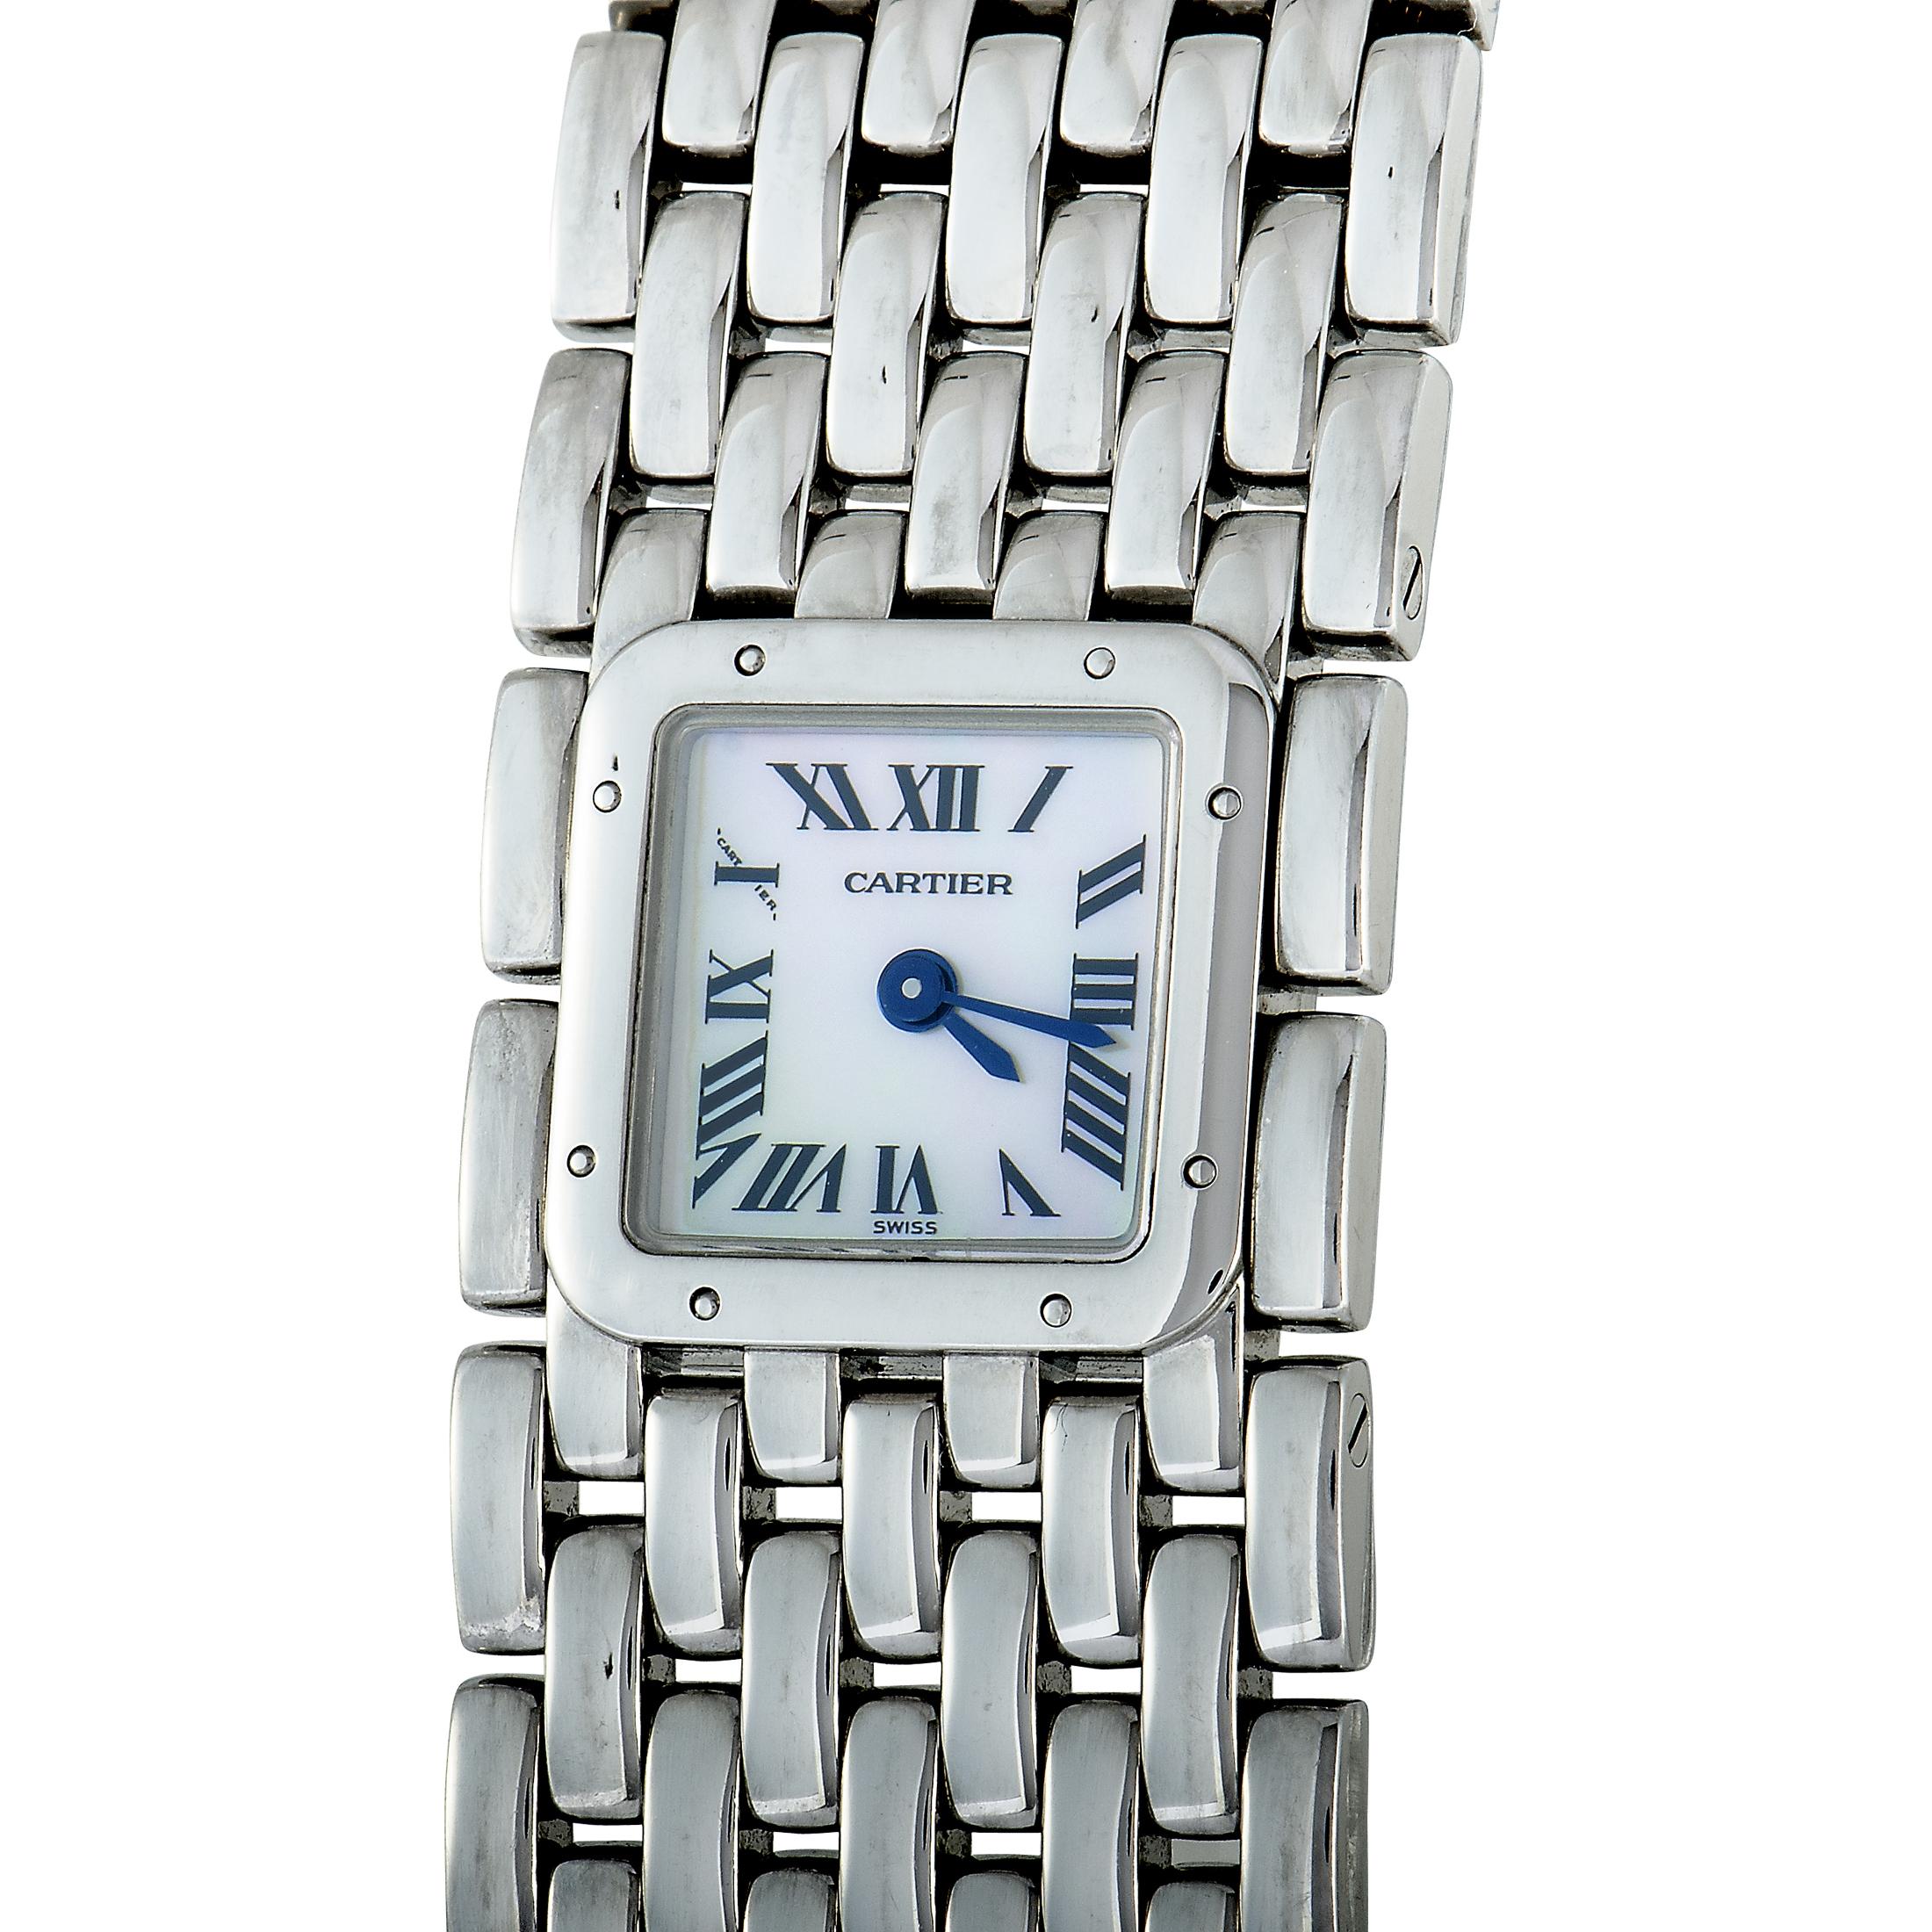 This is the Panthère watch by Cartier, reference number 2420.

The watch is water-resistant and made of stainless steel. The mother of pearl dial with Roman numerals features central hours and minutes. The watch is powered by a quartz